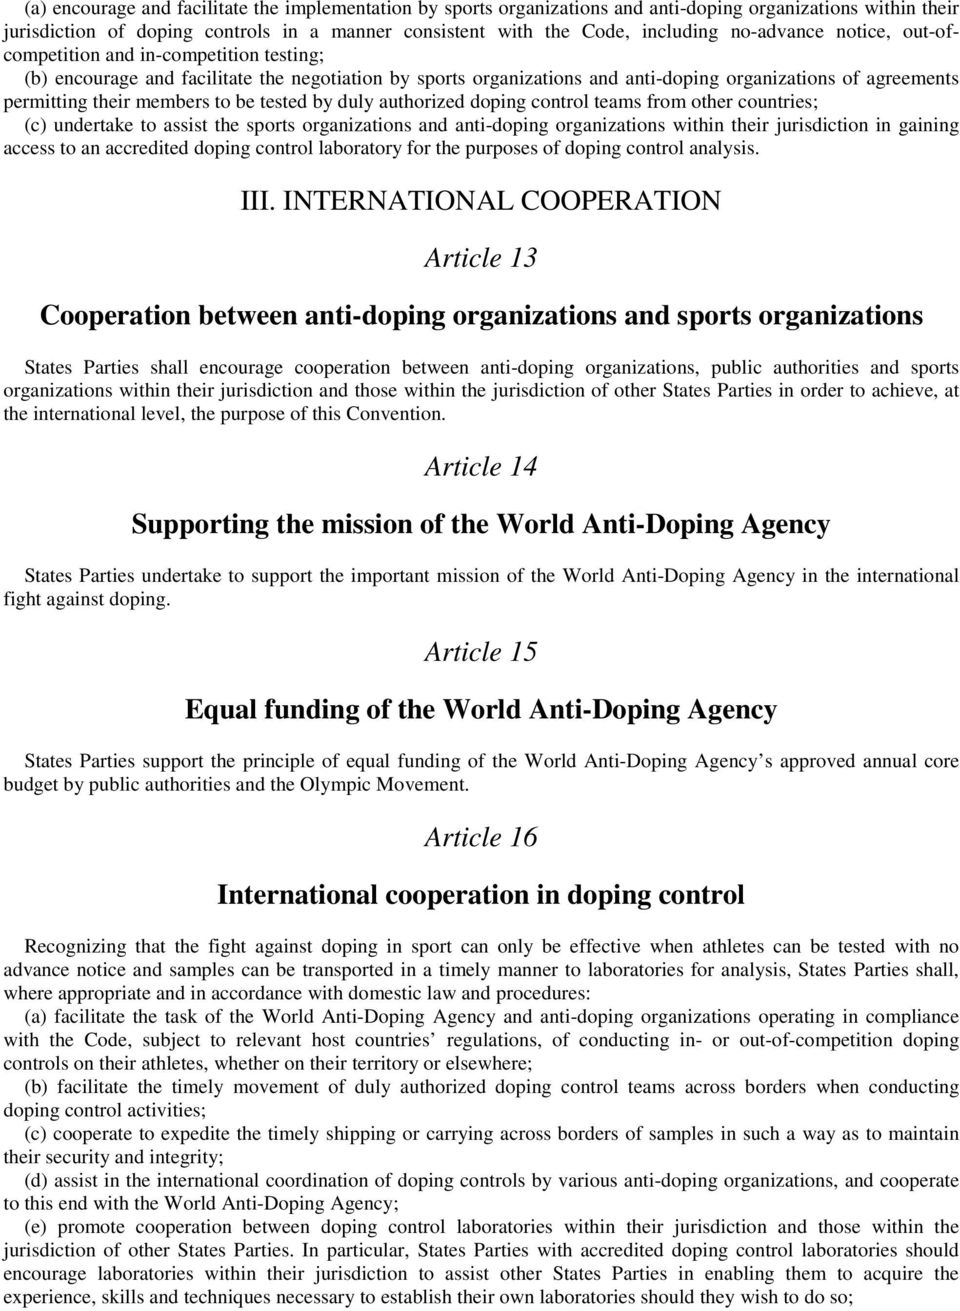 members to be tested by duly authorized doping control teams from other countries; (c) undertake to assist the sports organizations and anti-doping organizations within their jurisdiction in gaining